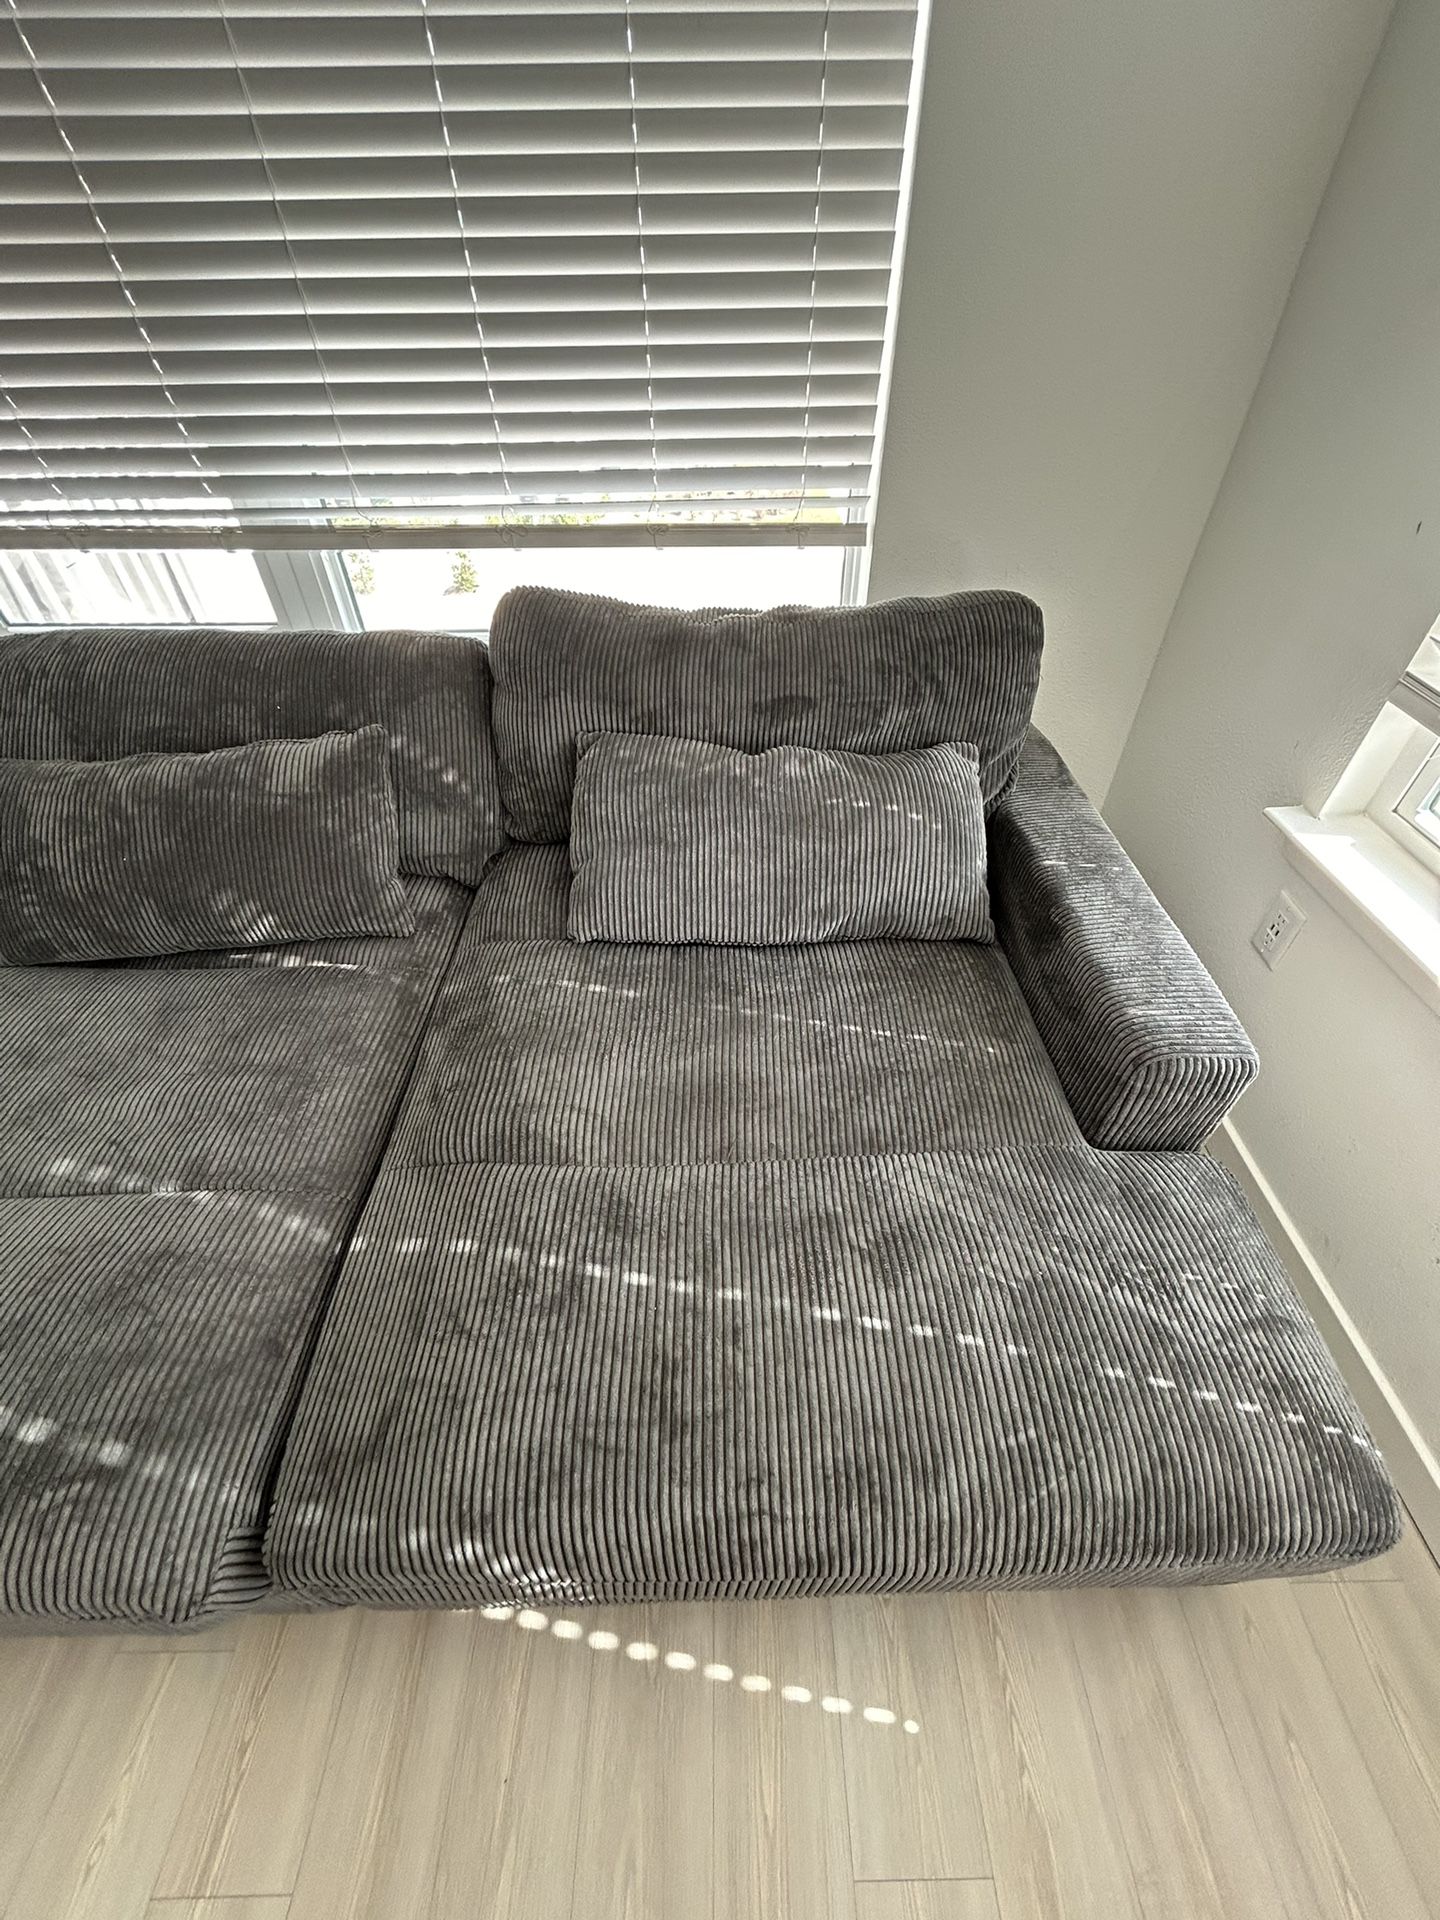 Comfortable Grey Couch 